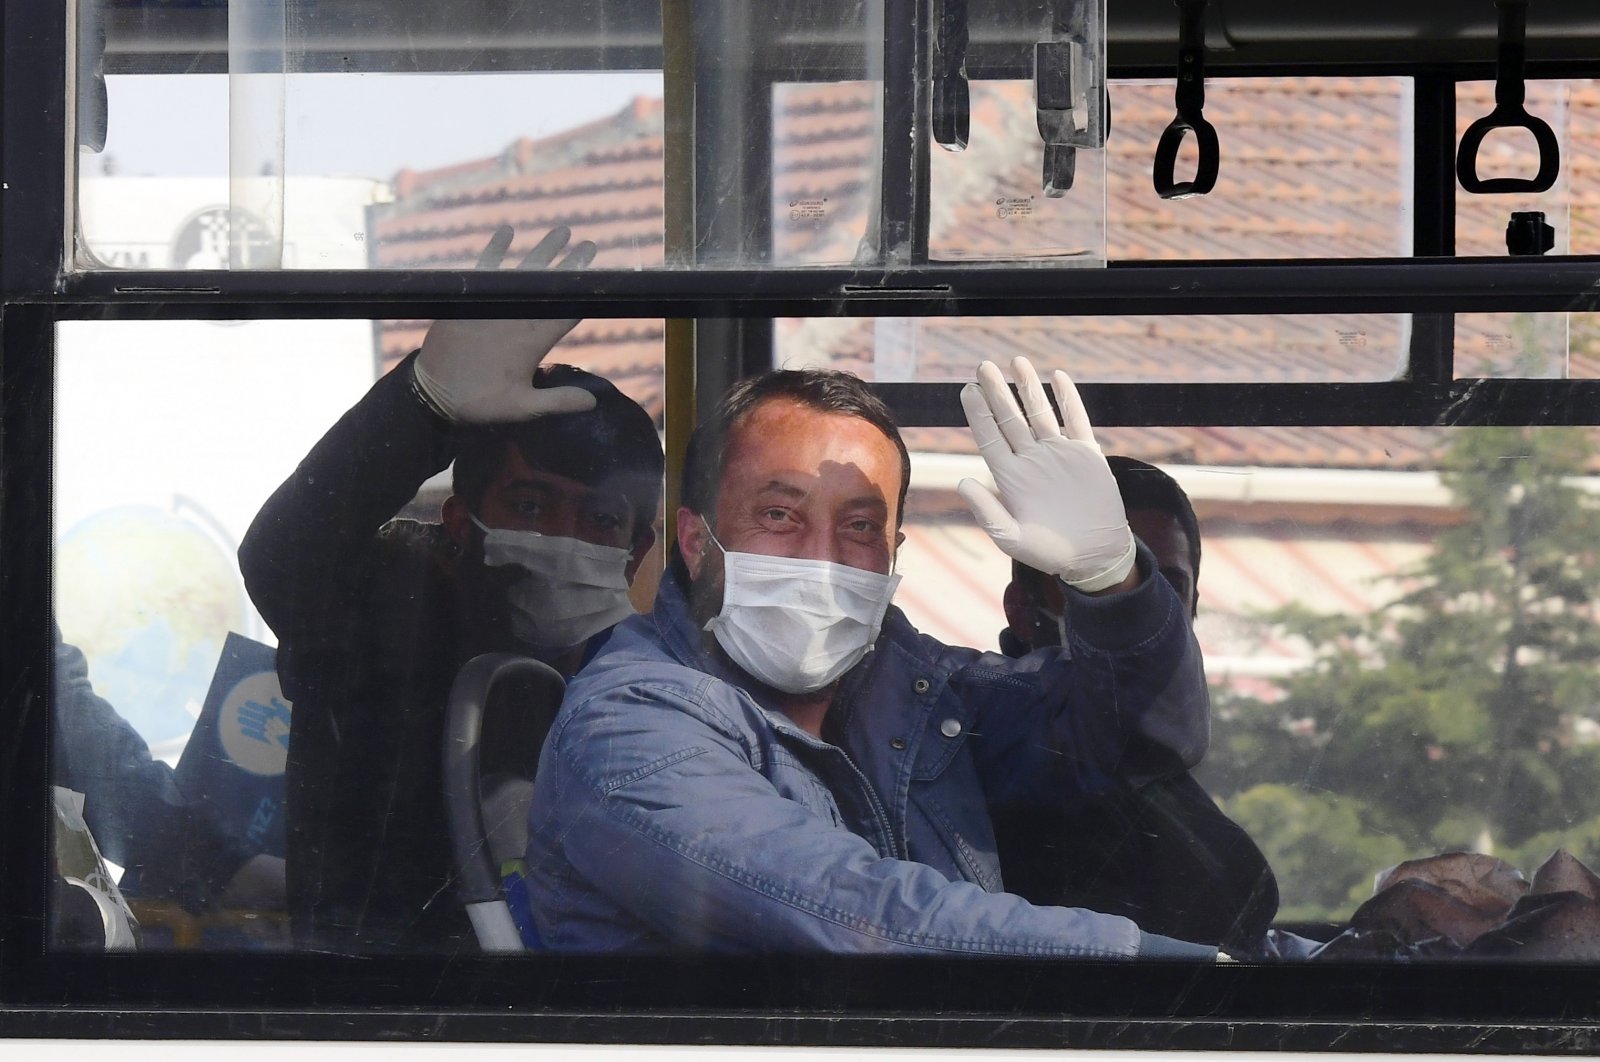 Prisoners released wave as they sit in a bus, in the capital Ankara, Turkey, April 15, 2020. (AP PHOTO)